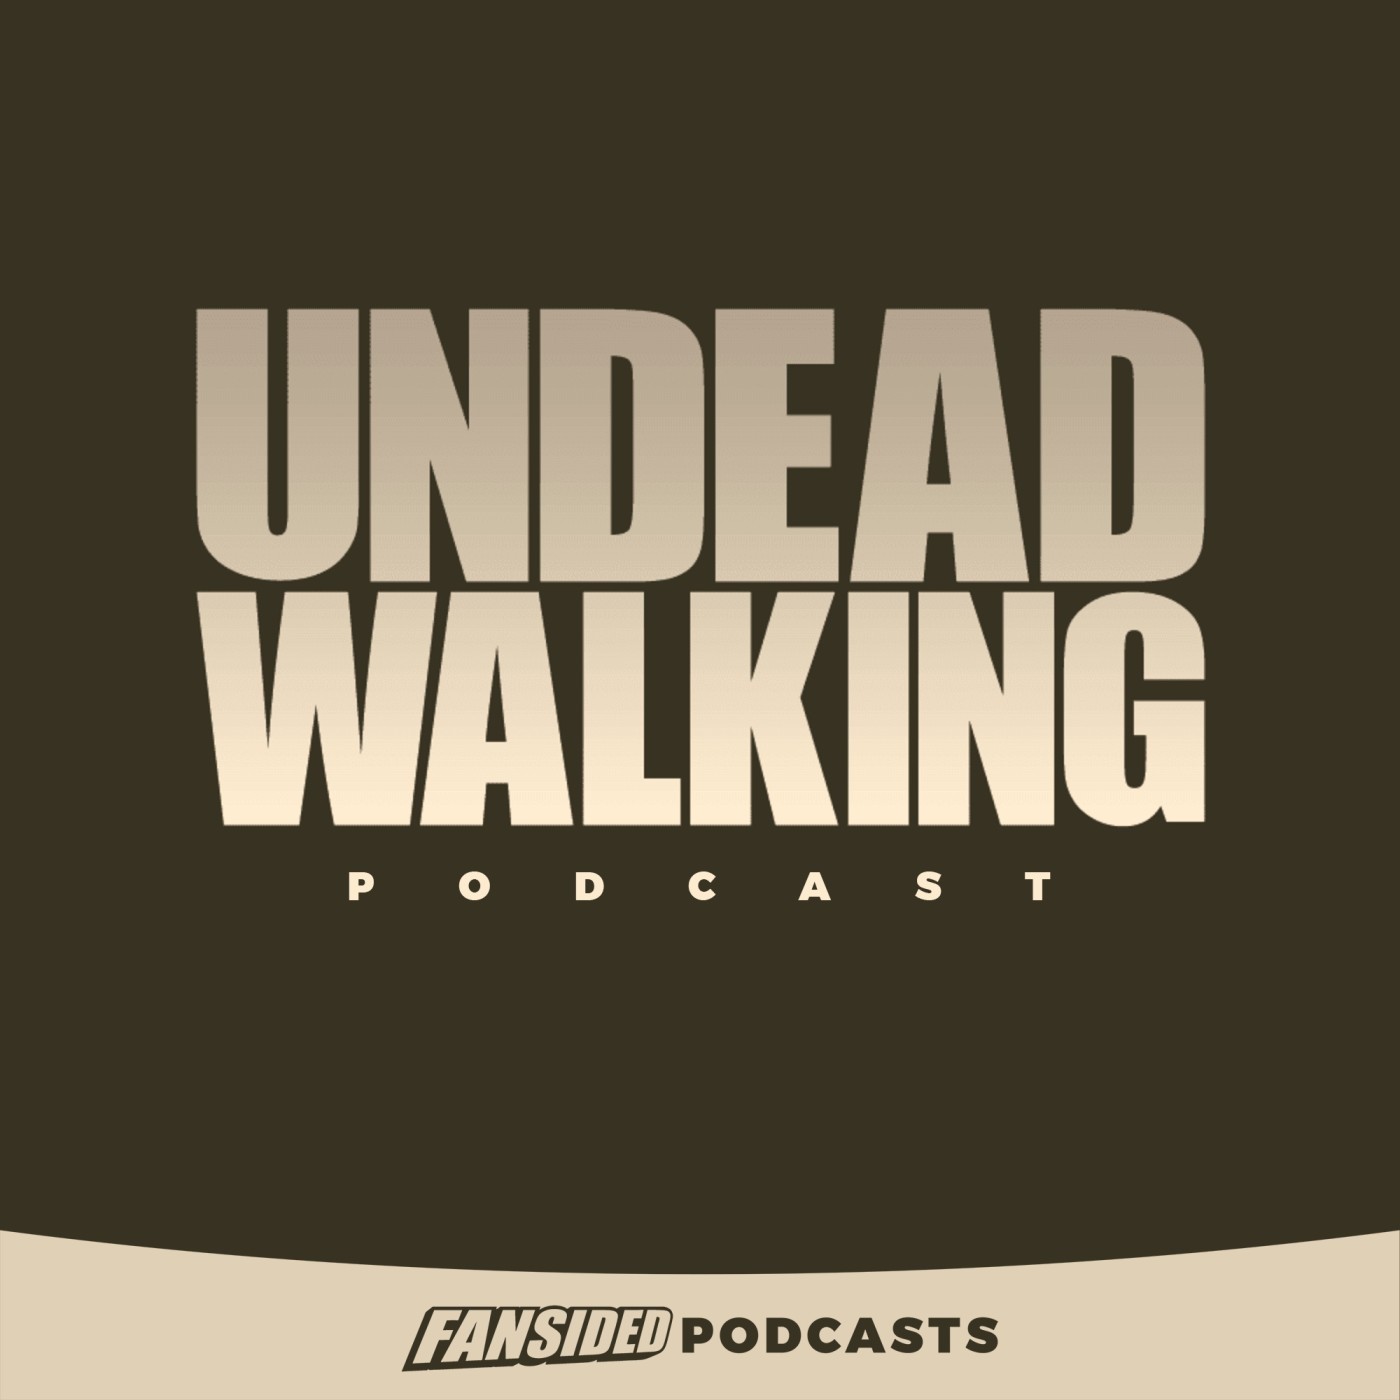 The Walking Dead "Hunted" review with special guest Jeffrey Kopp